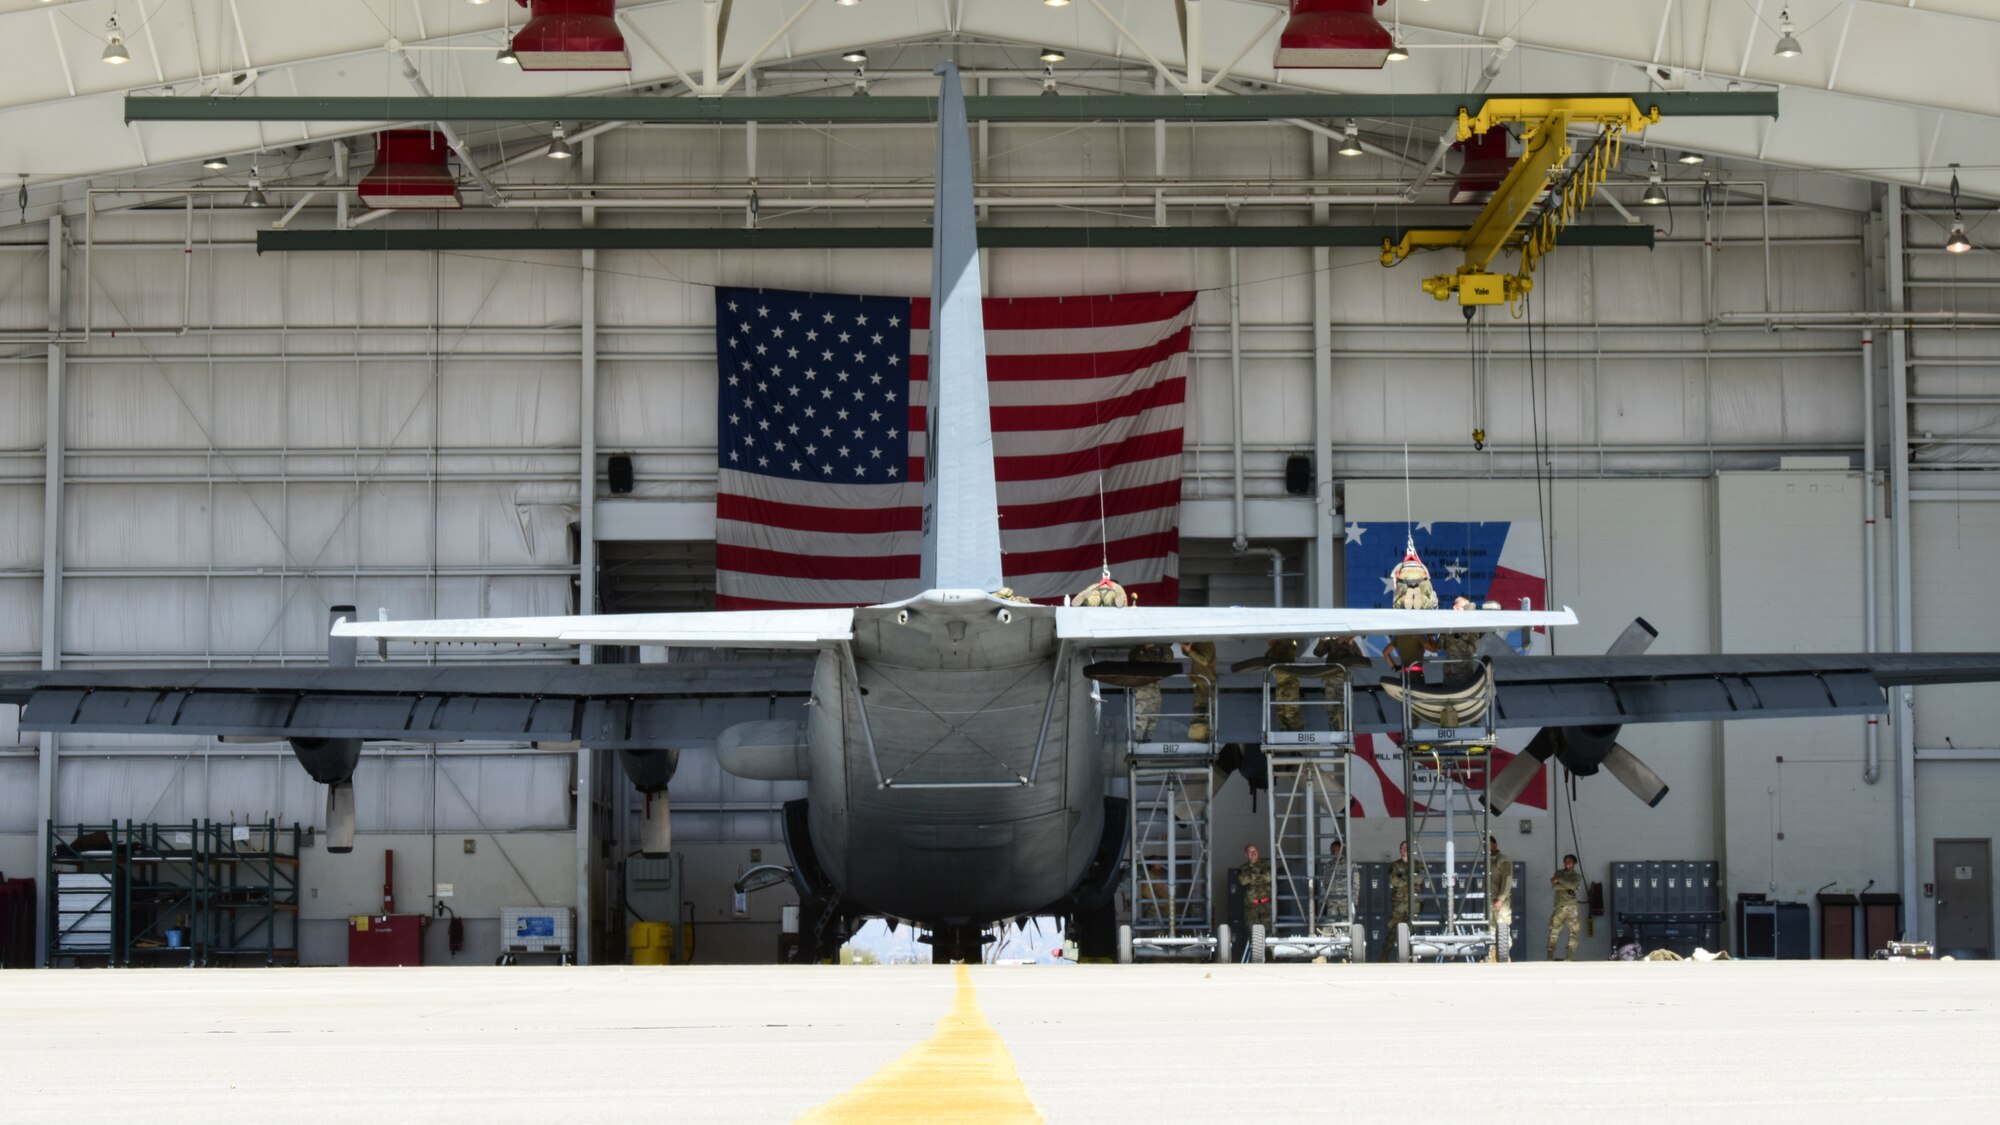 Maintainers work on aircraft